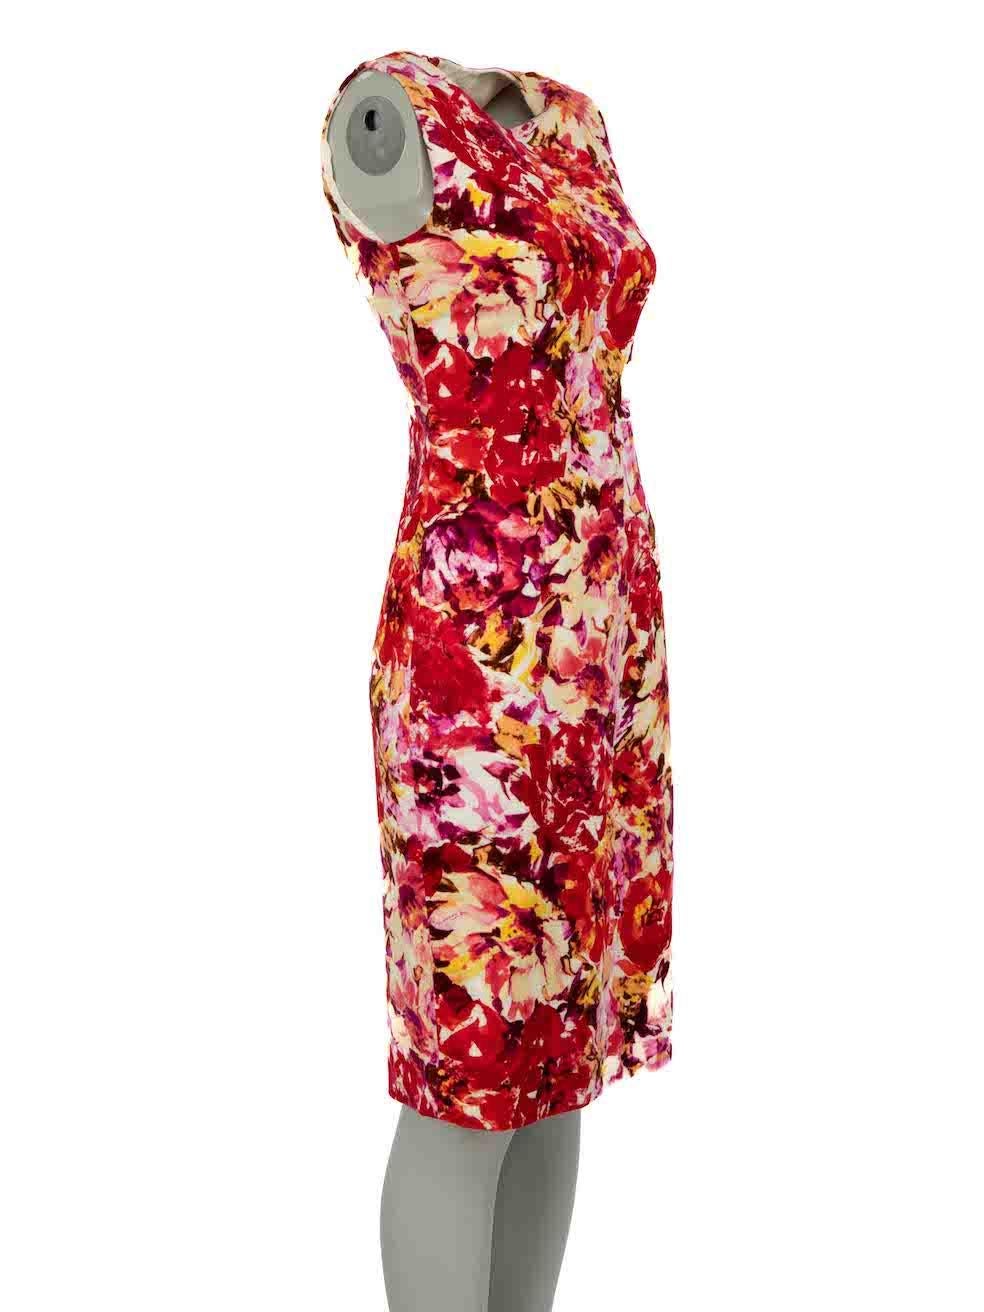 CONDITION is Good. Minor wear to dress is evident. Light colour discolouration to the inner neckline and armpits on this used Moschino designer resale item.
 
Details
Red
Cotton
Dress
Floral pattern
Sleeveless
Round neck
Midi
Back zip fastening
